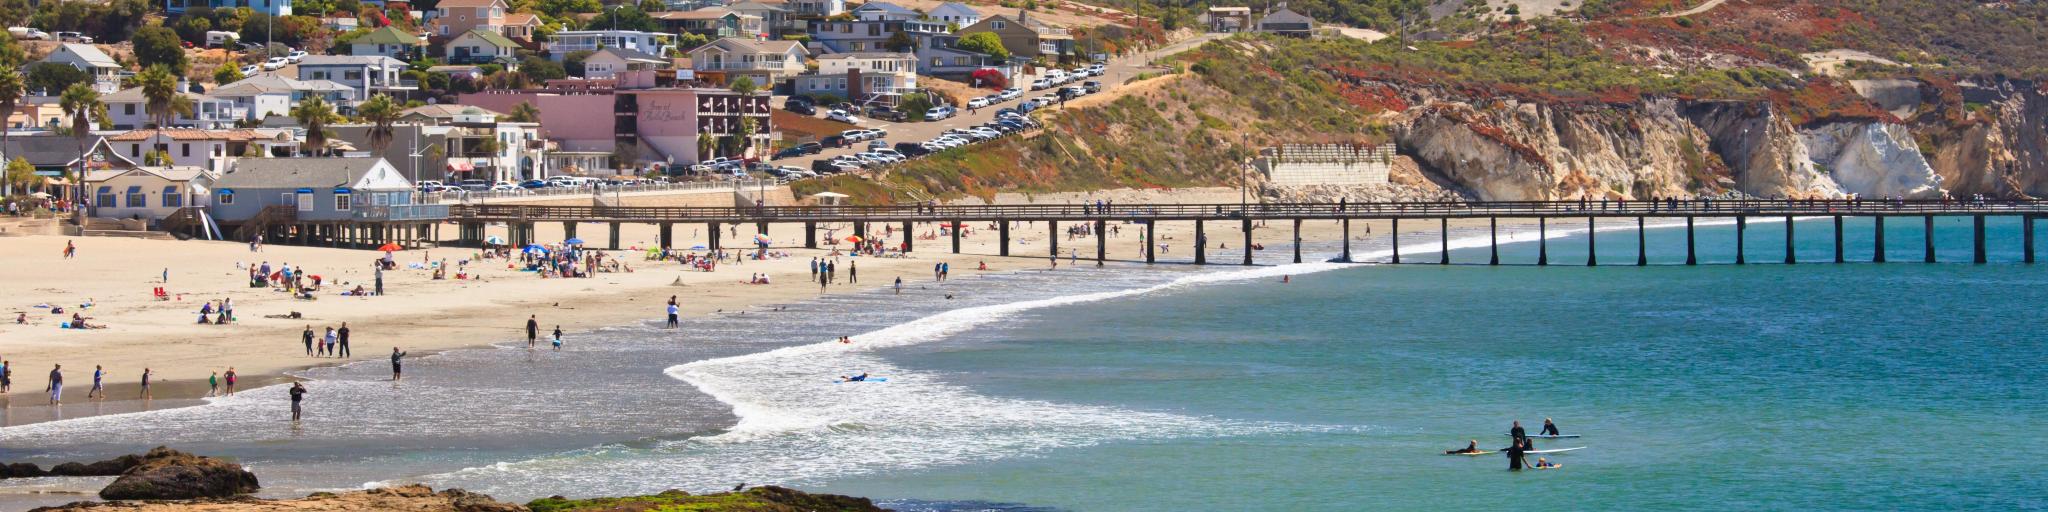 View across the ocean at Avila Beach, with the sandy shores and coastline dotted with sunbathers and swimmers, and pier jutting into the water